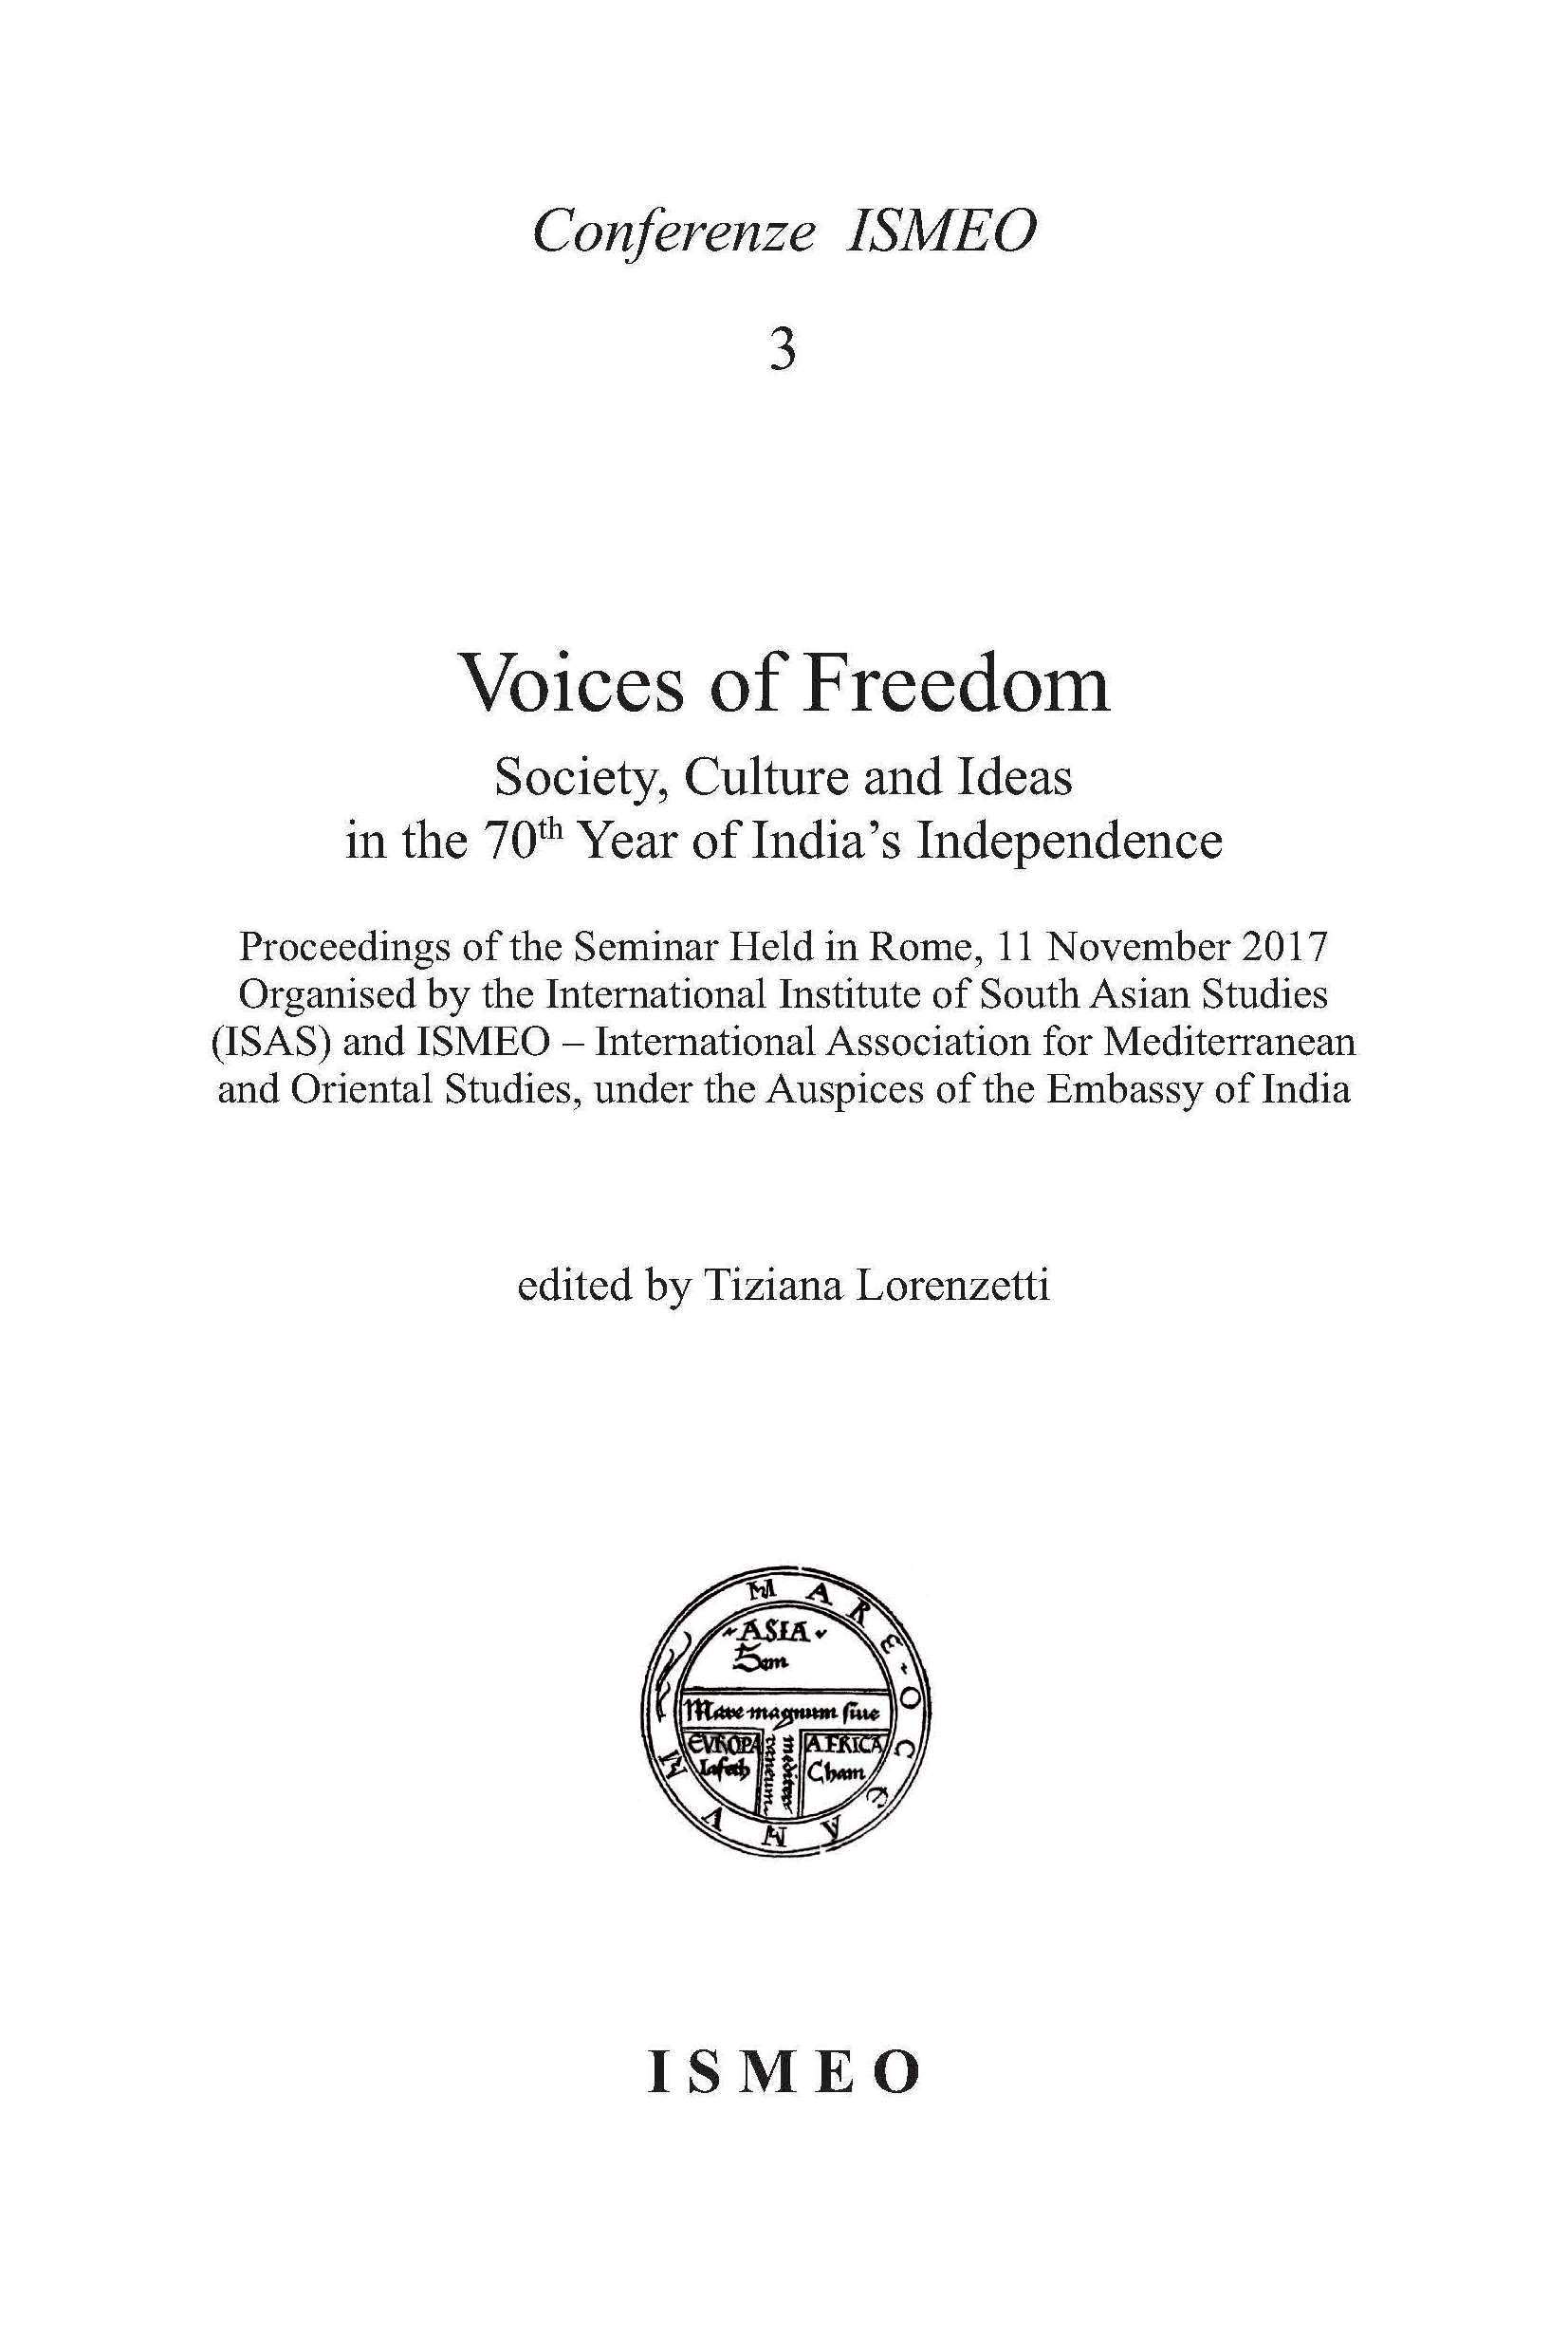 Voices of Freedom
Society, Culture and Ideas
in the 70th Year of India's Independence - - Il Novissimo Ramusio - Conferenze ISMEO 3